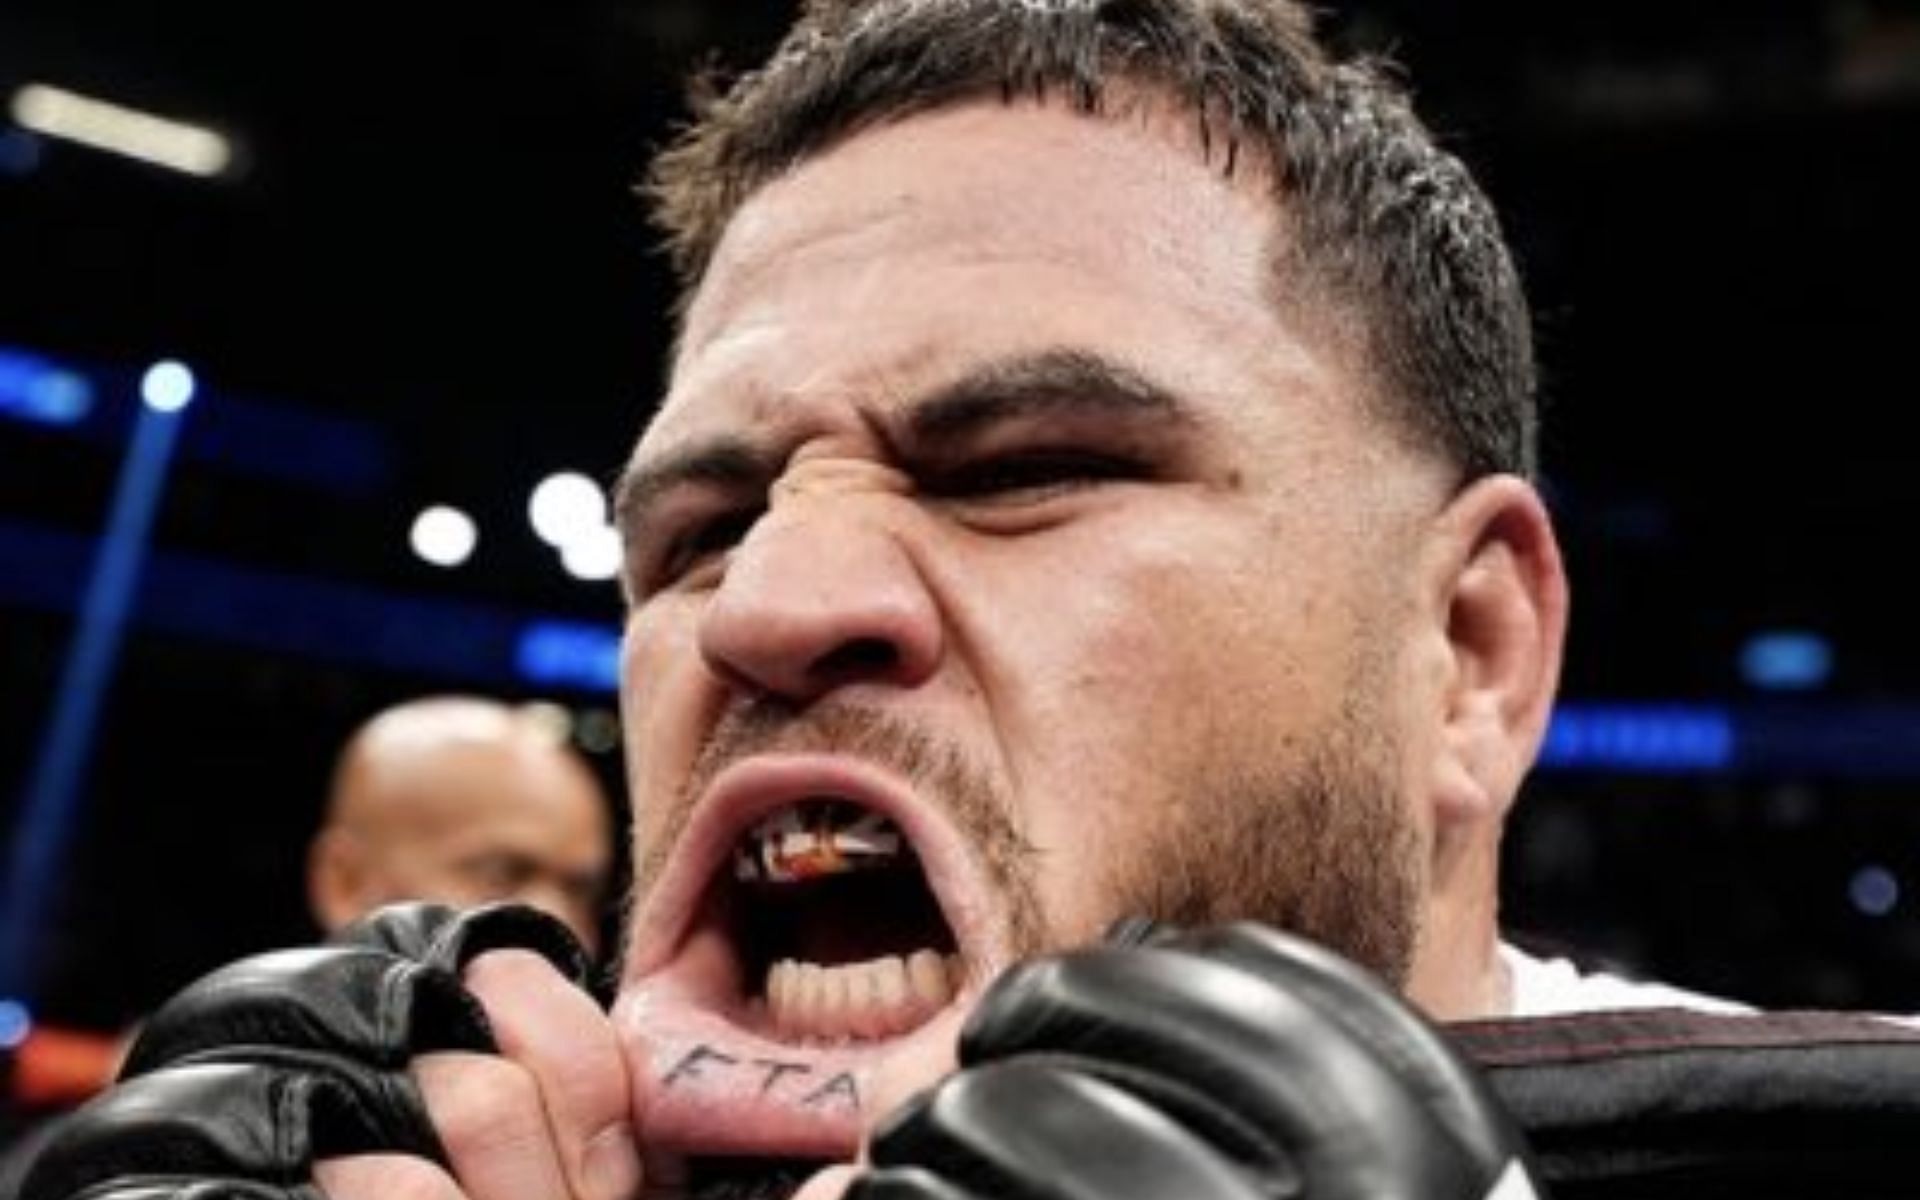 Tai Tuivasa could steal the show at UFC 293 this weekend [Image Credit: @bambamtuivasa on Twitter]